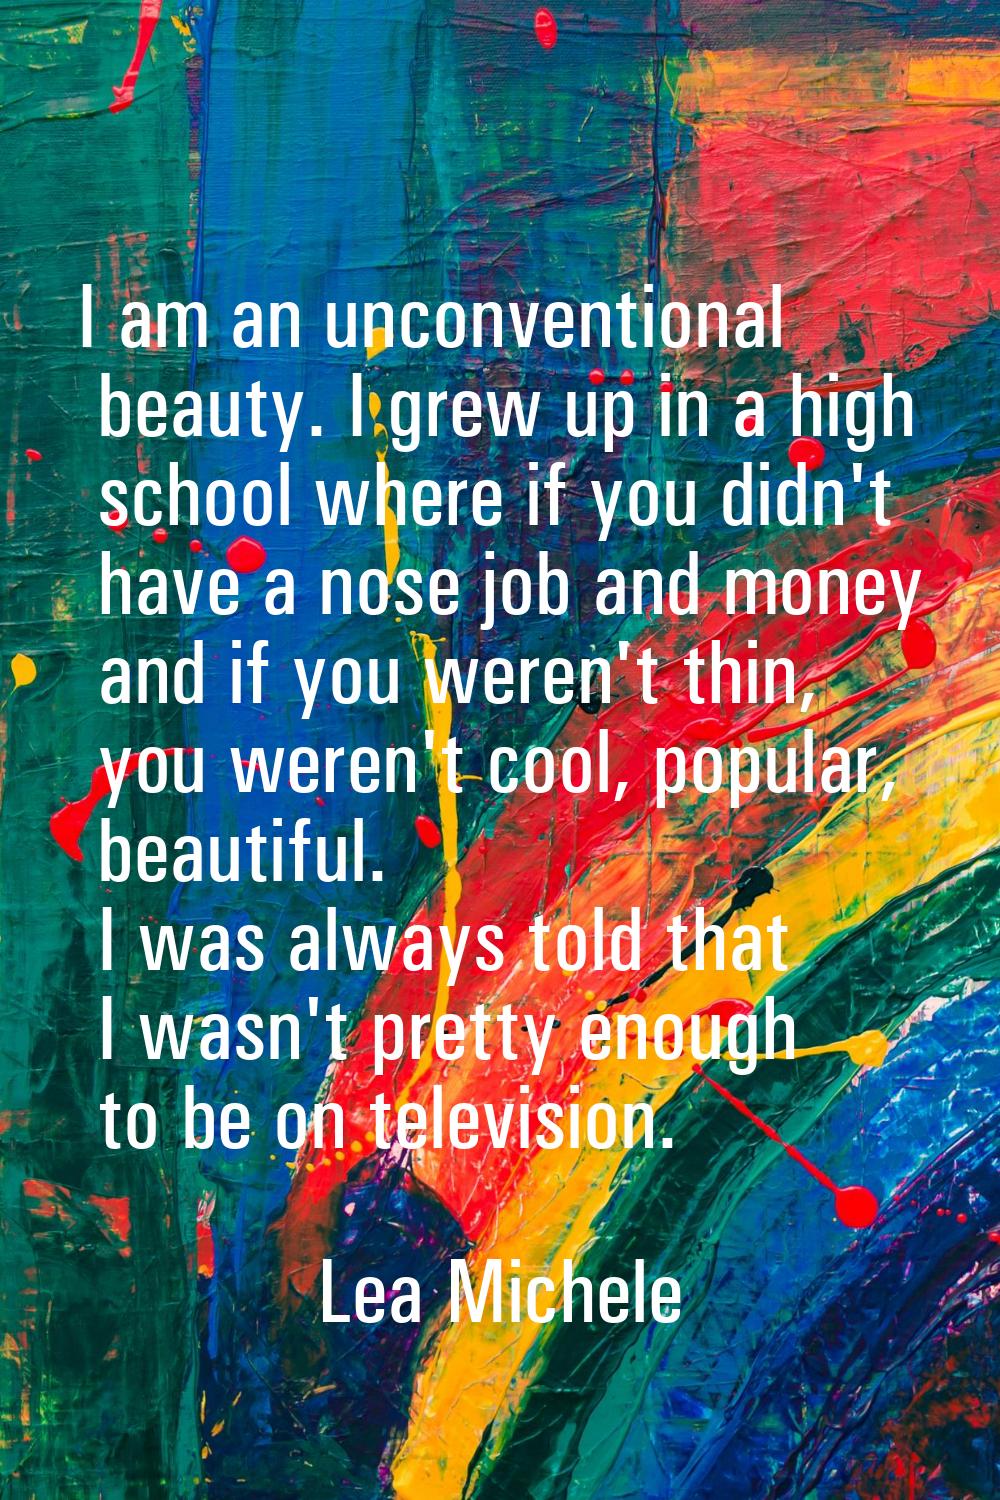 I am an unconventional beauty. I grew up in a high school where if you didn't have a nose job and m